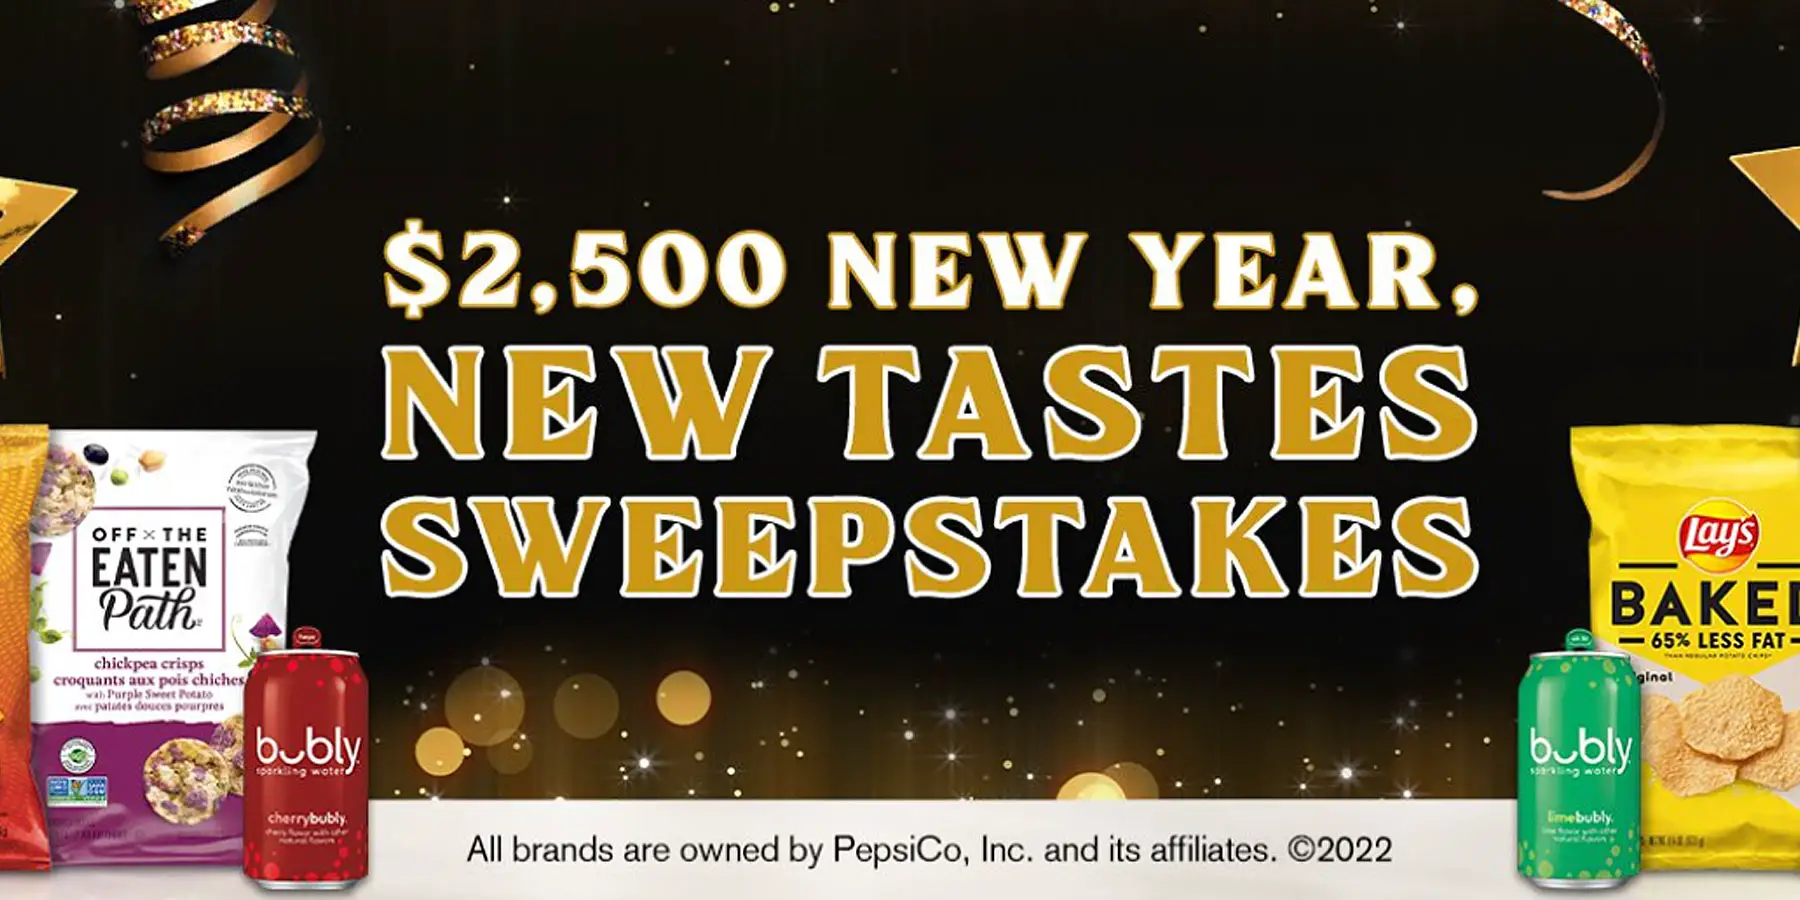 Enter for your chance to win $2,500 cash when you enter the Tasty Rewards New Year, New Tastes Sweepstakes. Enter today and you could put that money towards achieving your biggest resolutions for 2022. #giveaway